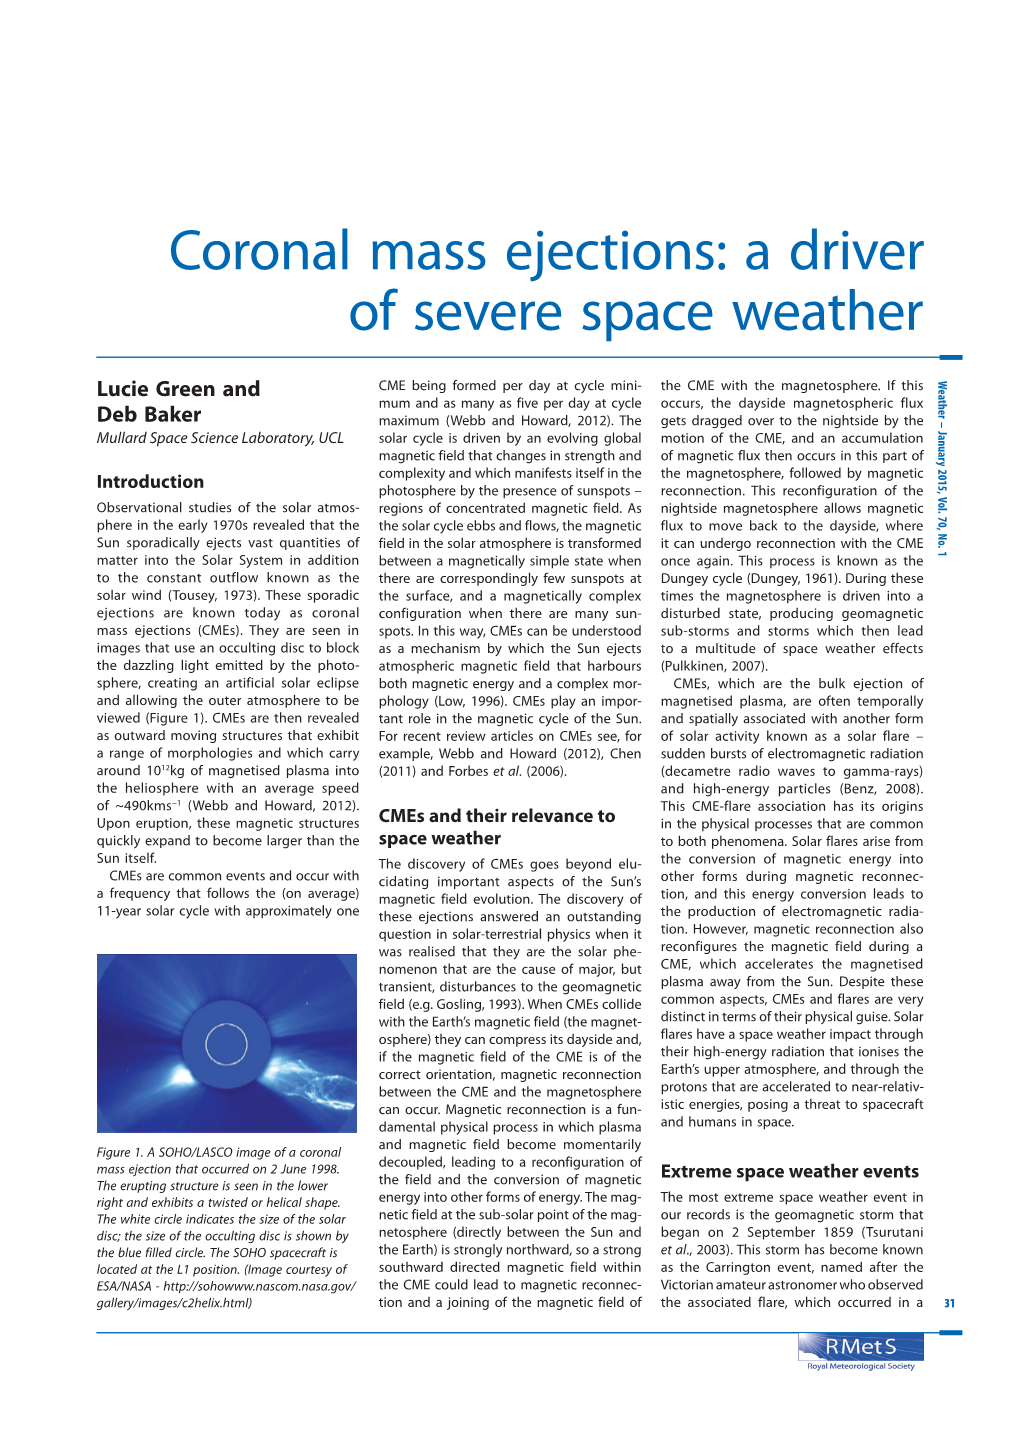 Coronal Mass Ejections: a Driver of Severe Space Weather